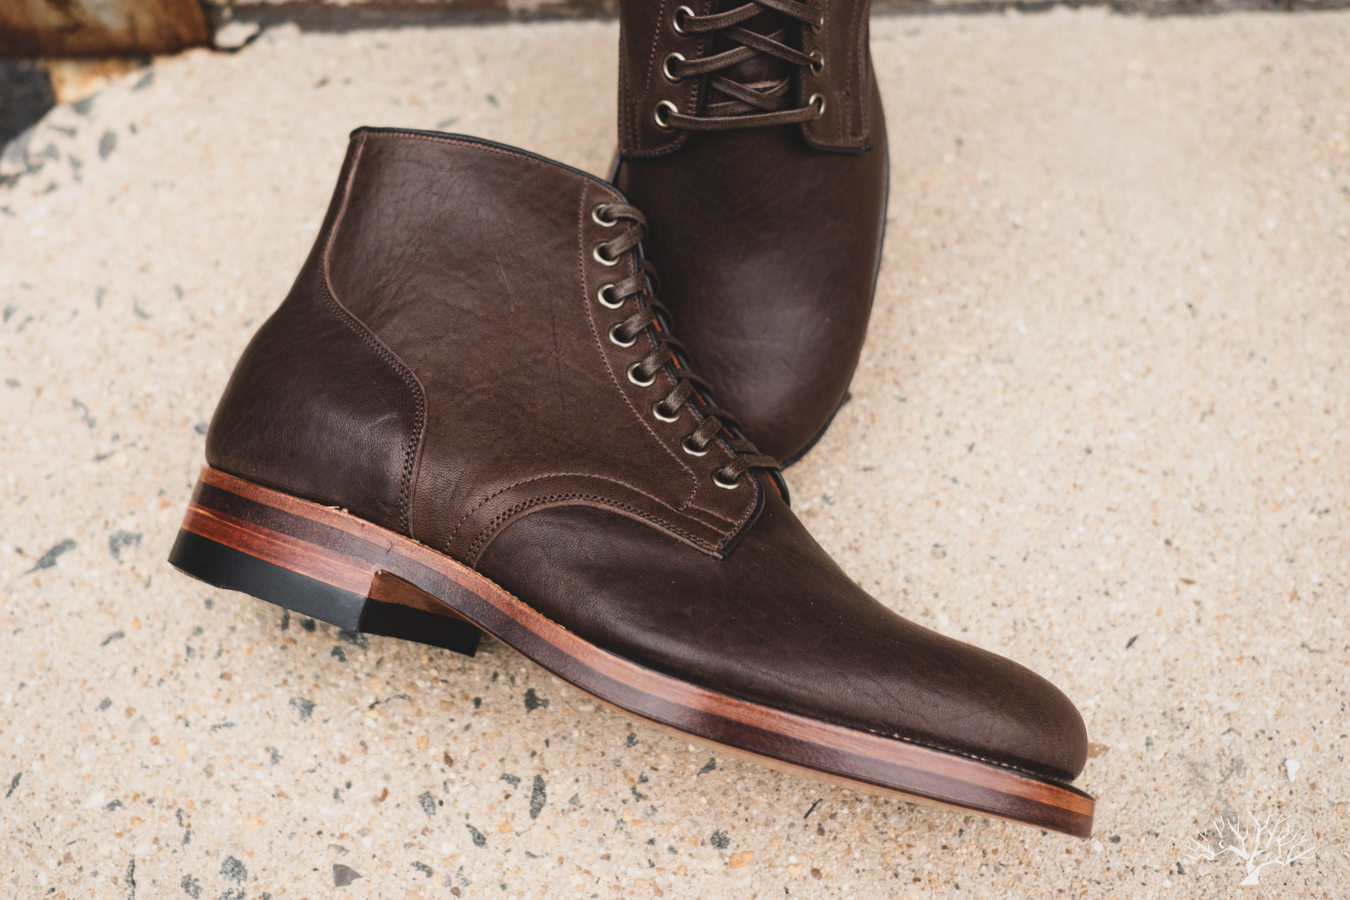 Viberg Horsehide Service Boot, Maryam Col. 1071 Washed Horsehide, Double Leather Sole